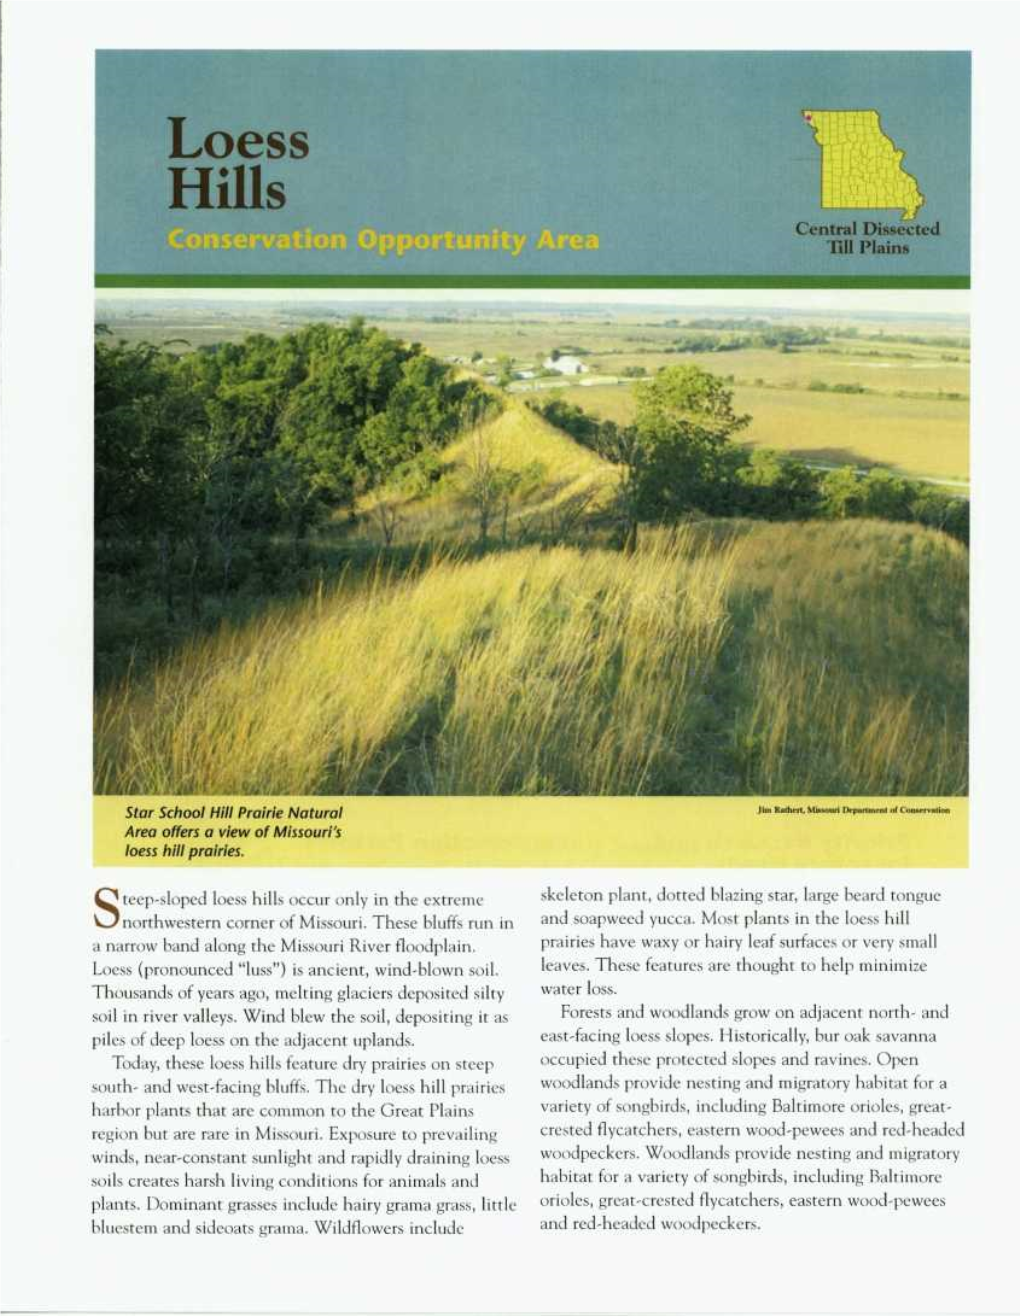 Teep-Sloped Loess Hills Occur Only in the Extreme Northwestern Corner Of